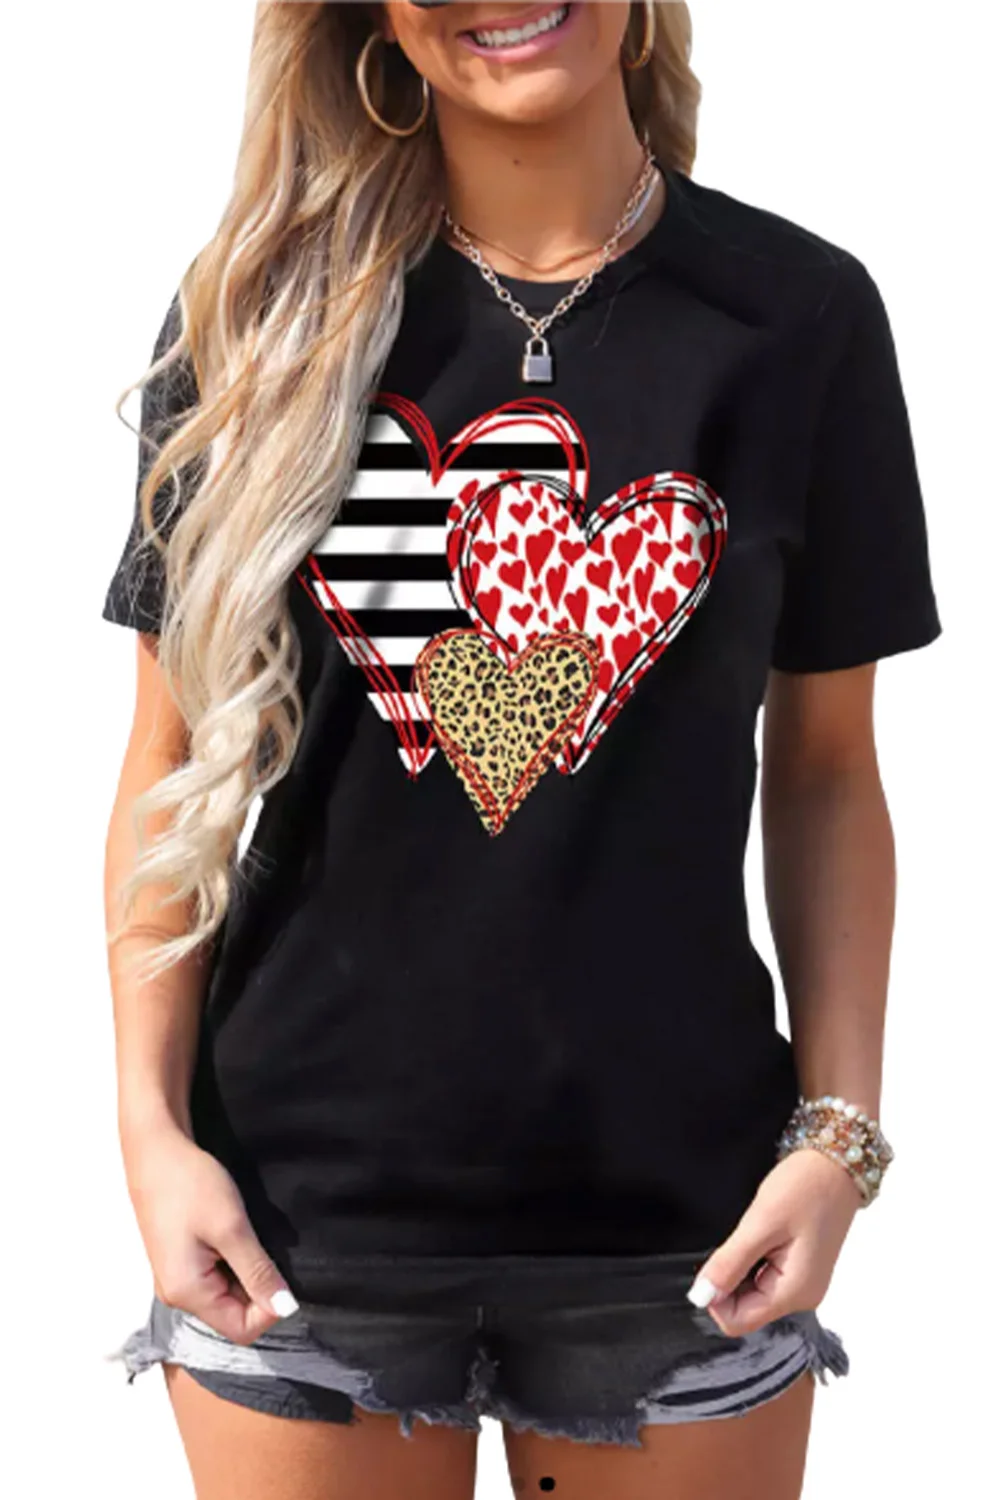 Leopard Striped Heart Shaped Print Graphic Tee